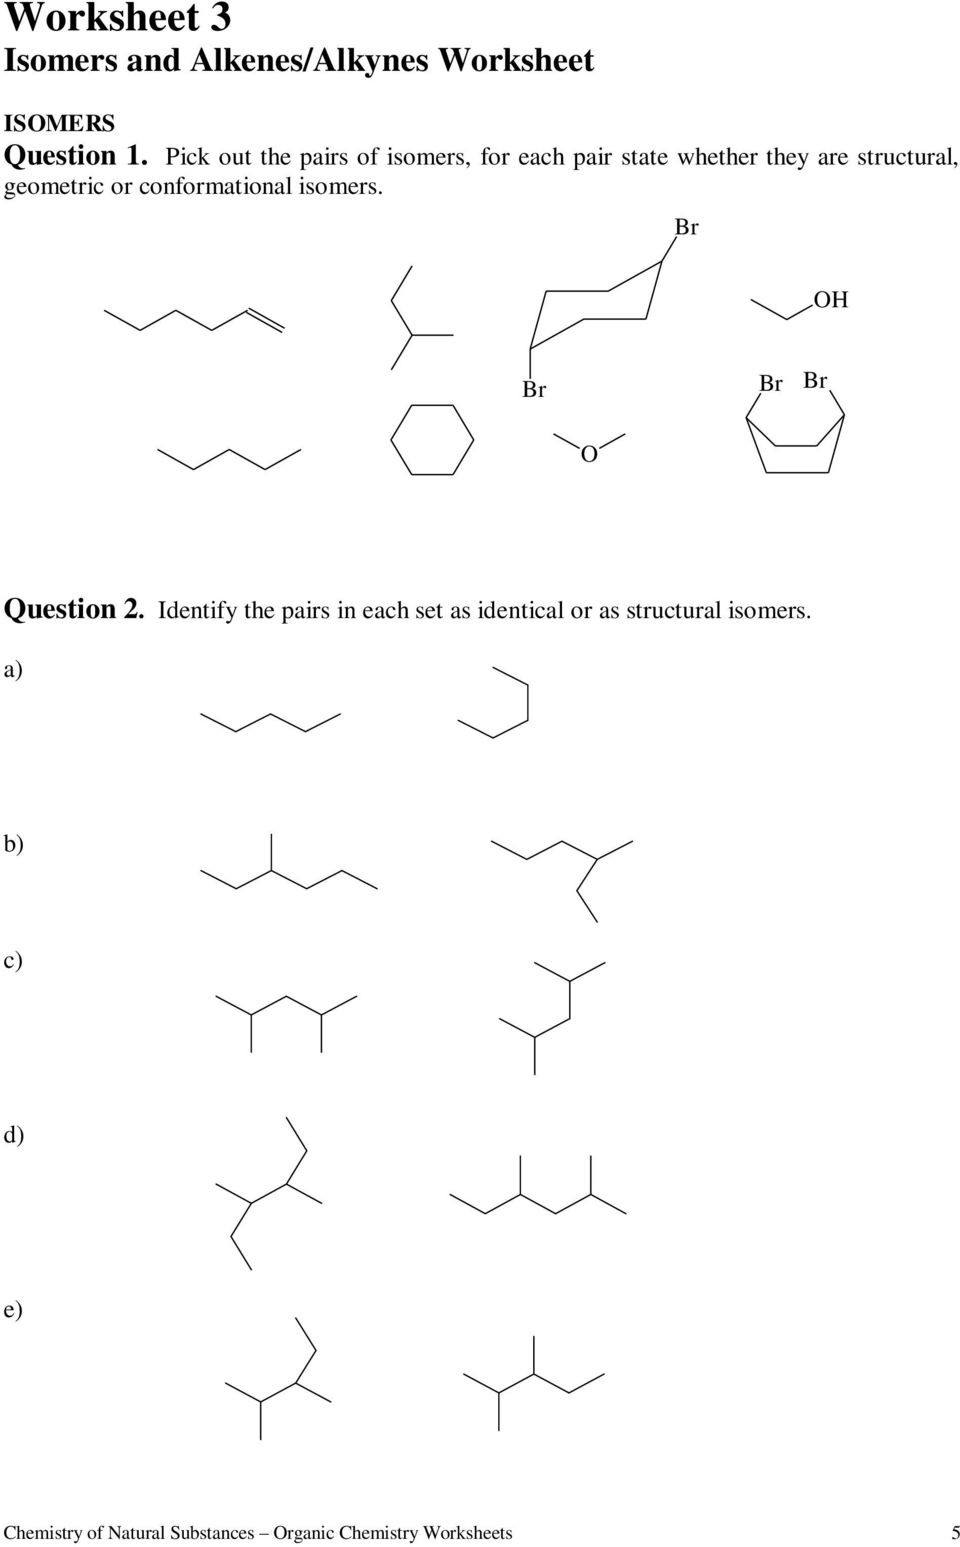 Organic Chemistry Worksheet with Answers Worksheets for organic Chemistry Pdf Free Chem Active